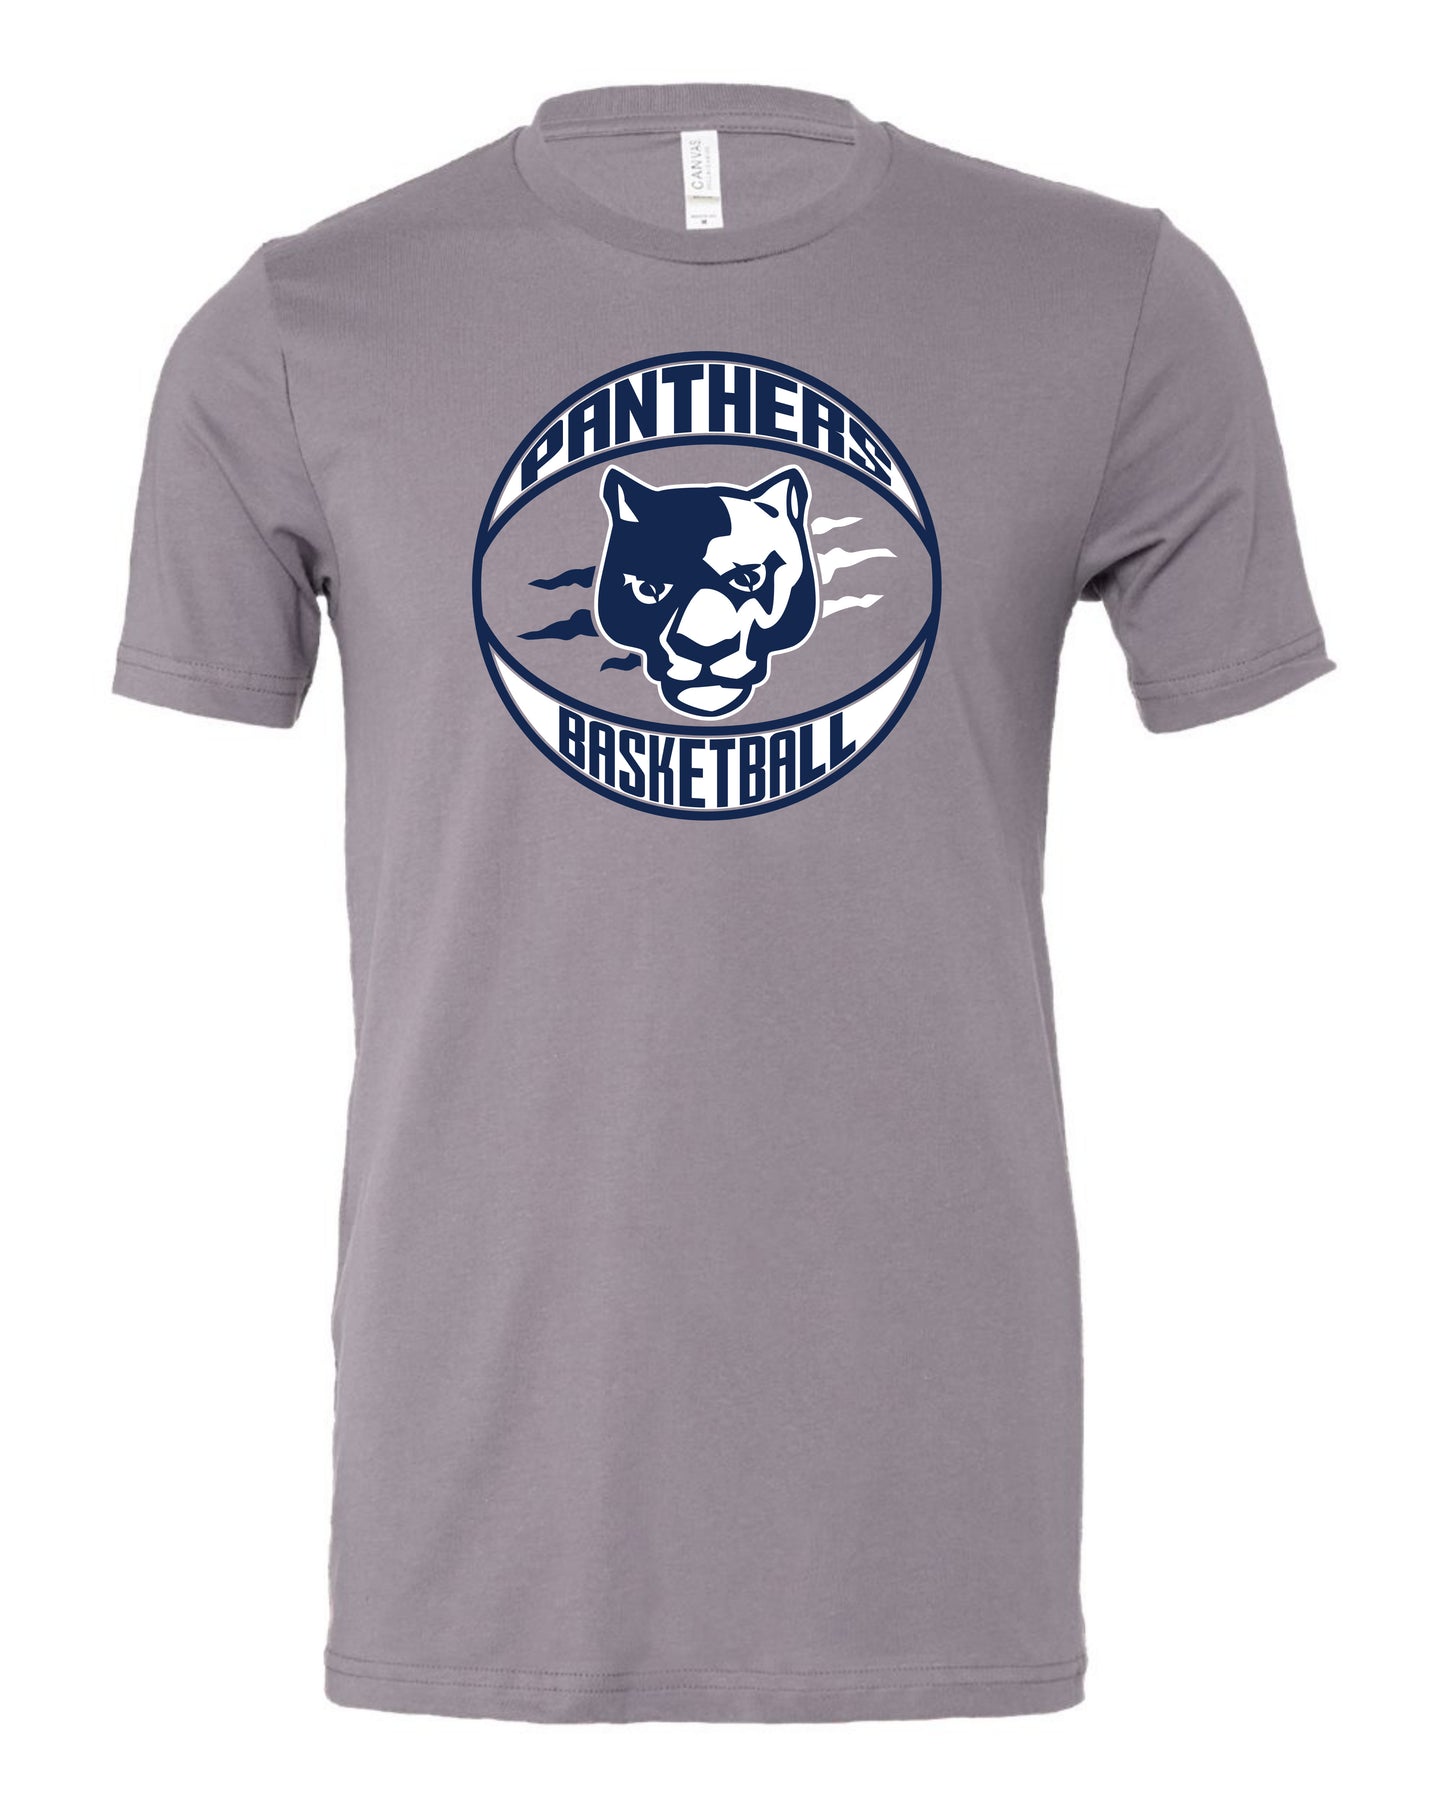 Panthers BBall Claw Ball - Adult Tee